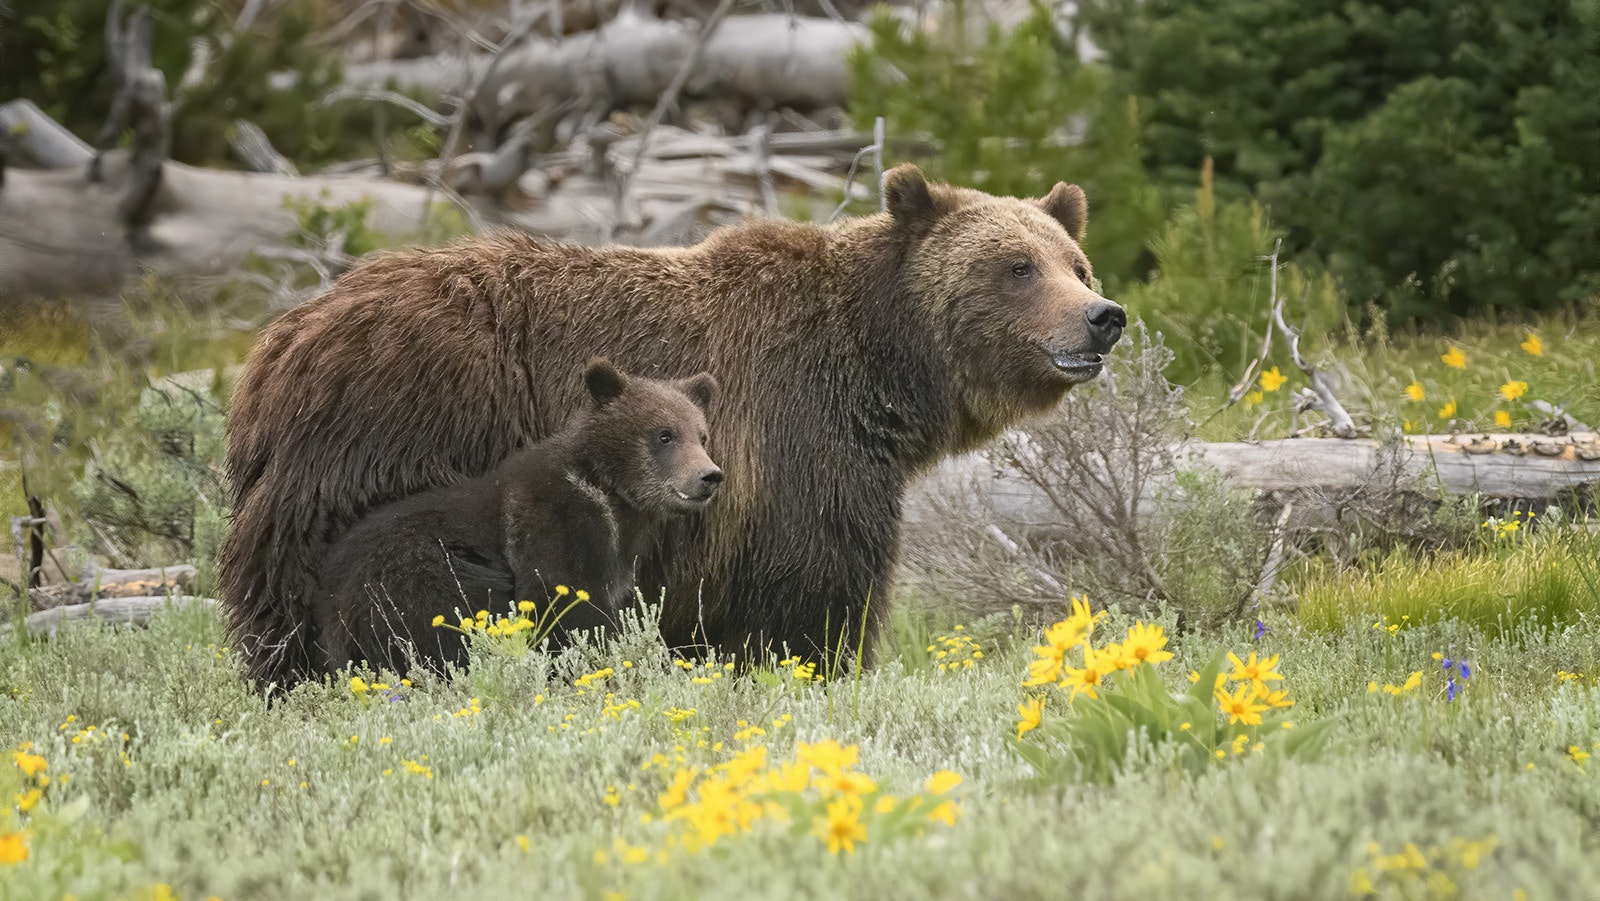 Grizzly 399 and her cub Spirit are doing well, taking advantage of lush foliage, hunters’ elk gut piles and other bear delicacies as they fatten up for winter hibernation.